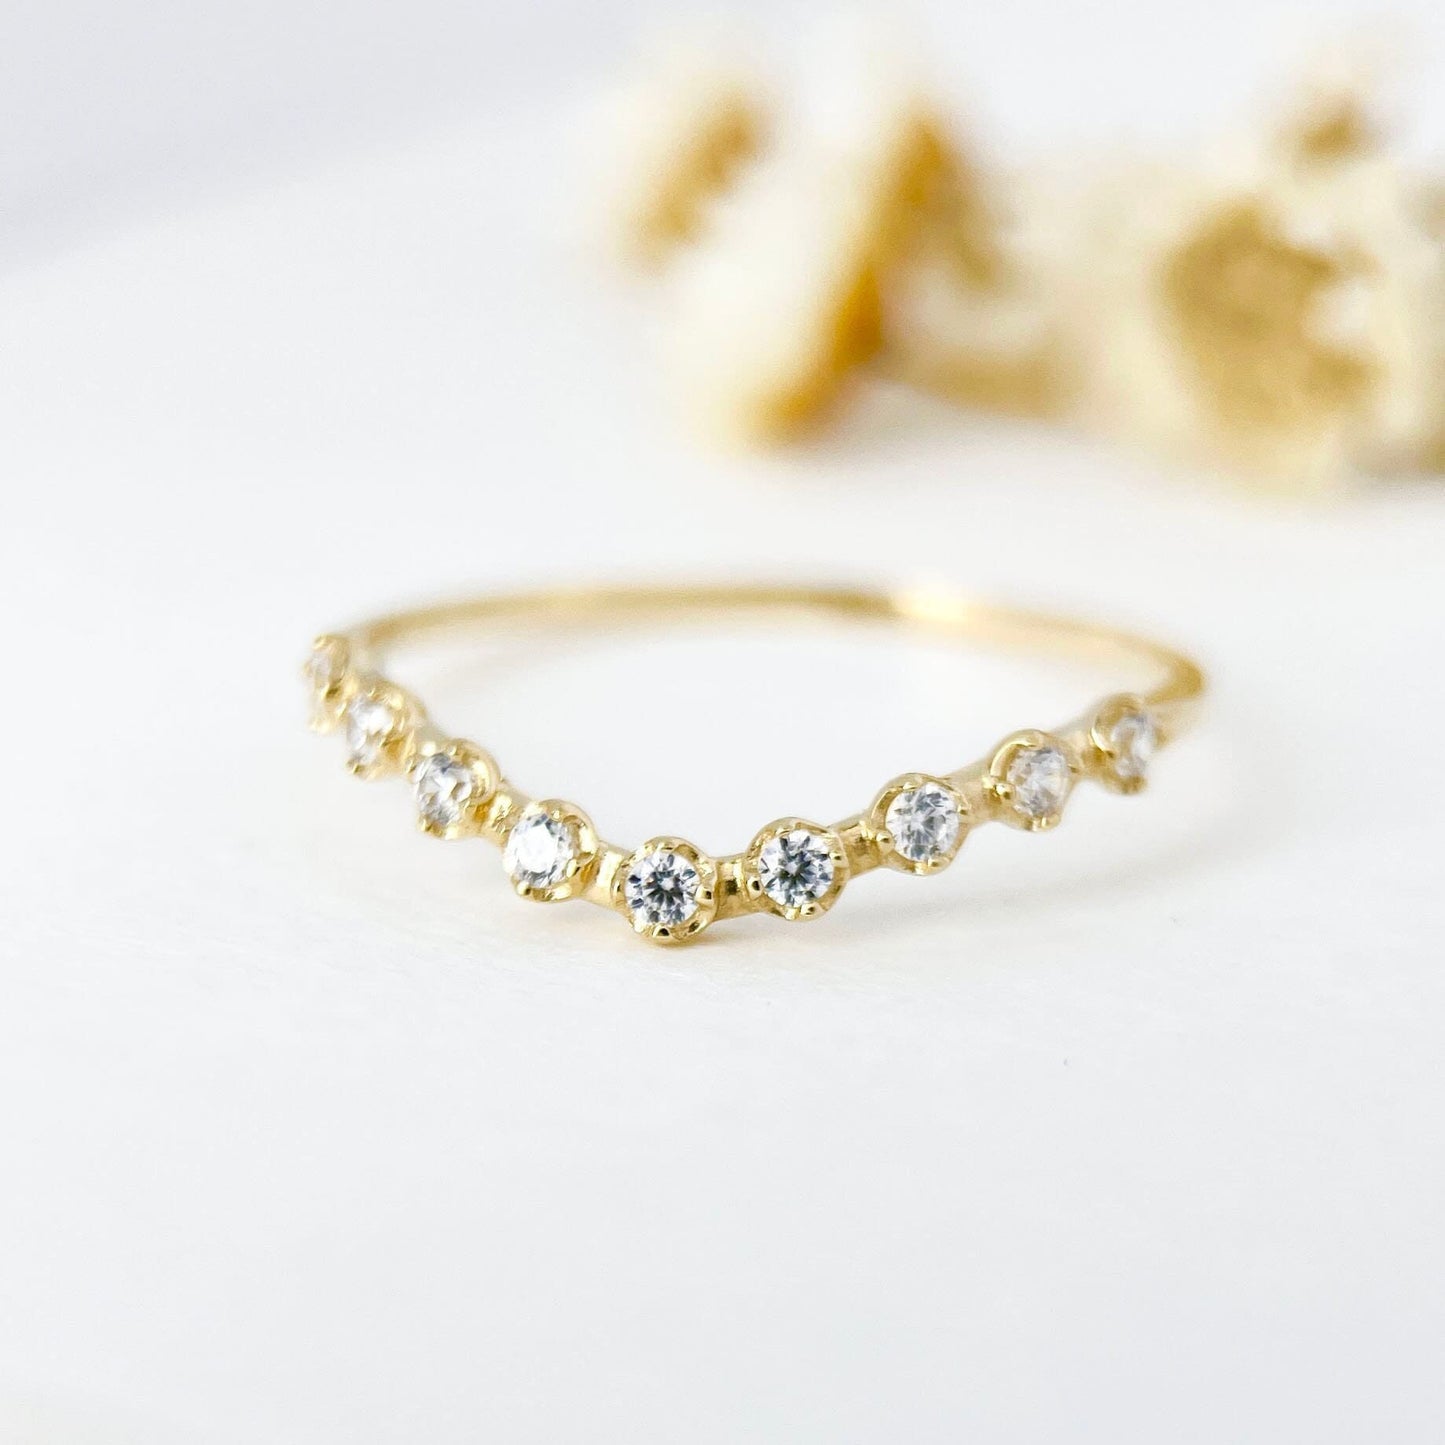 9K Real Solid Gold Pave-Set CZ Diamond Curved Wedding Band